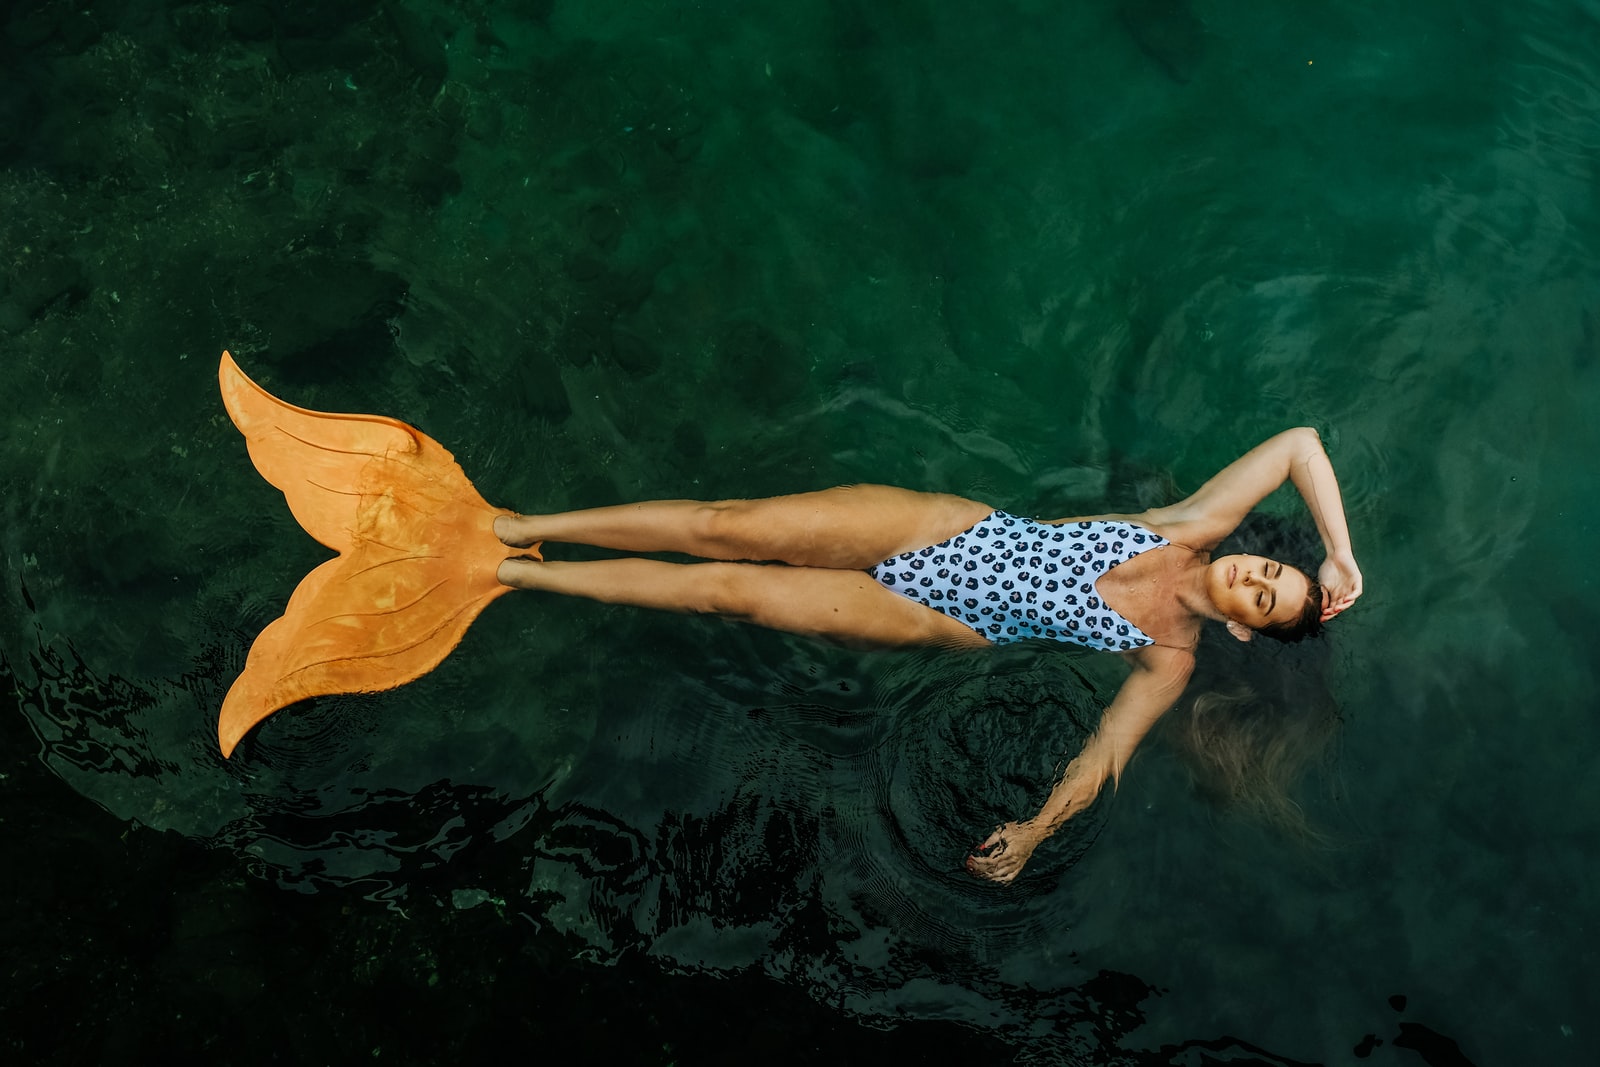 photo of woman floating on body of water with mermaid tail flippers